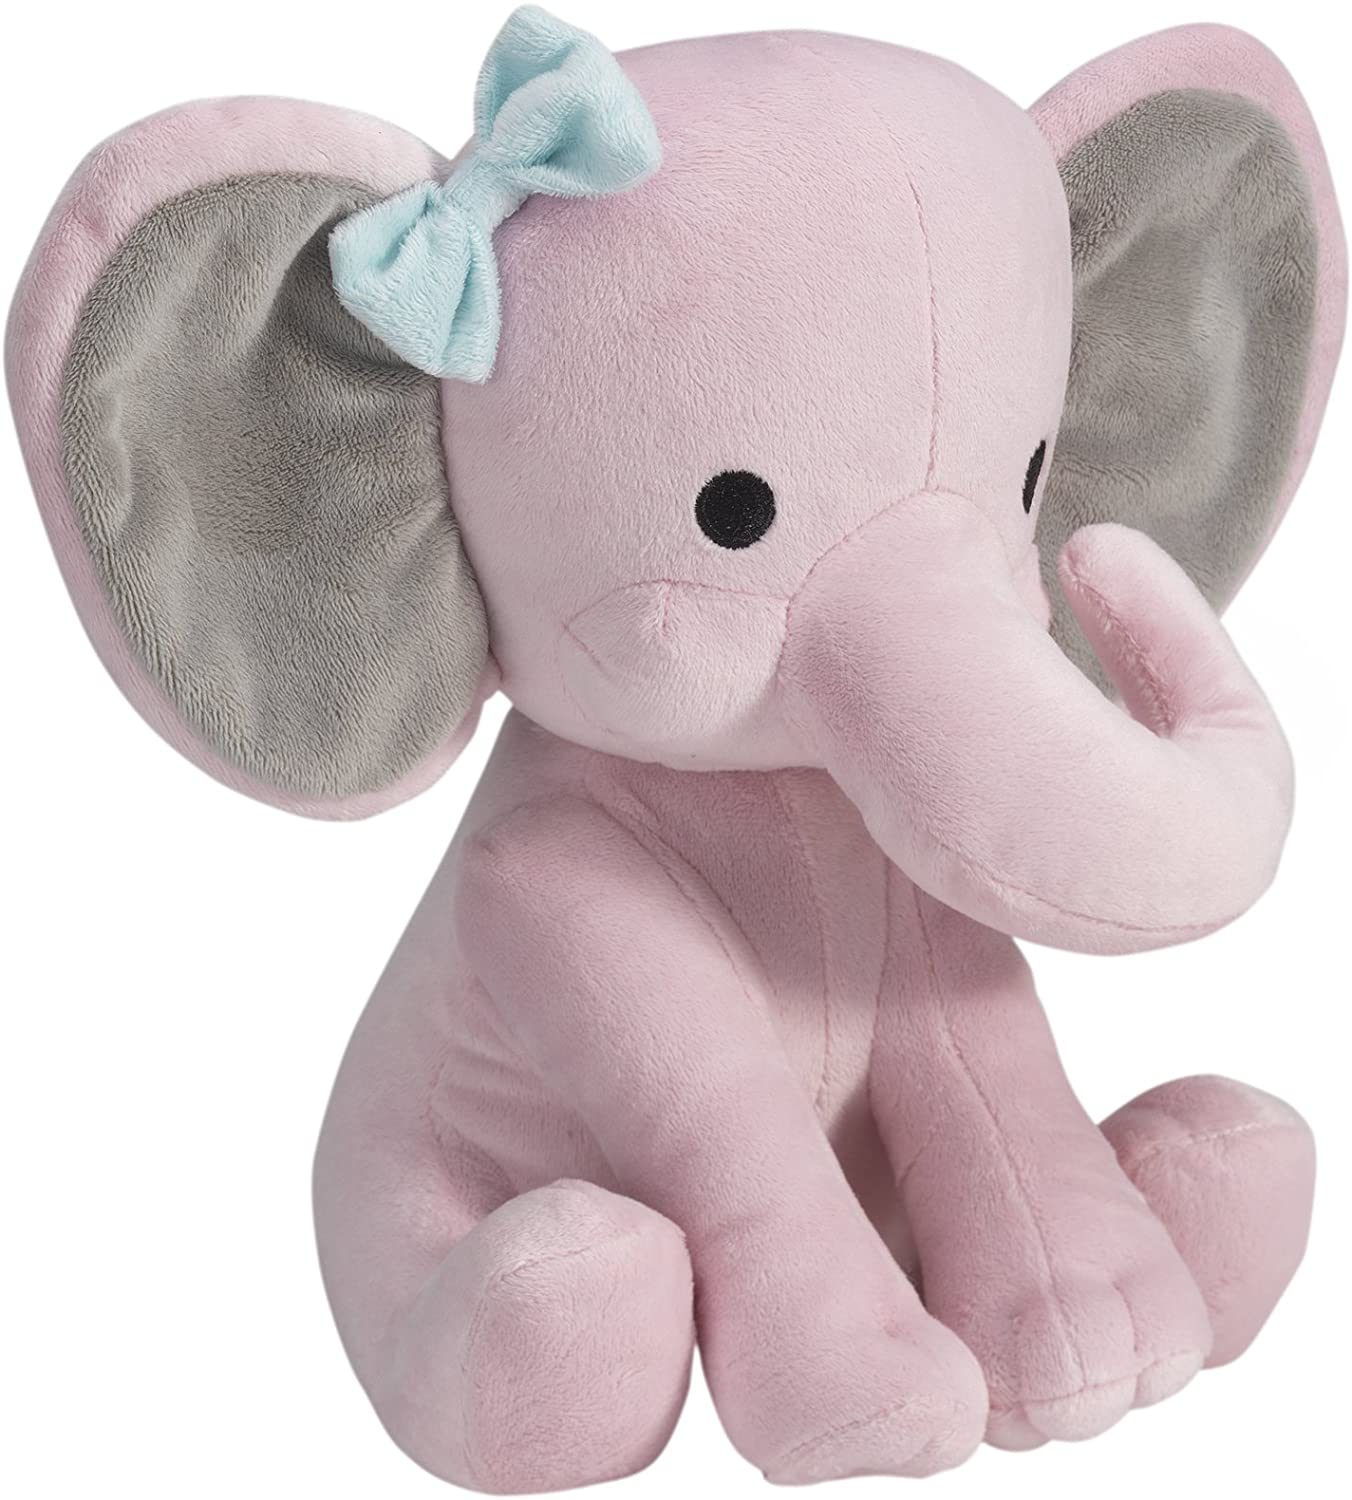 Bedtime Originals Twinkle Toes Pink Elephant Plush Toy (Hazel) $4.30 & More + Free Shipping w/ Prime or $25+